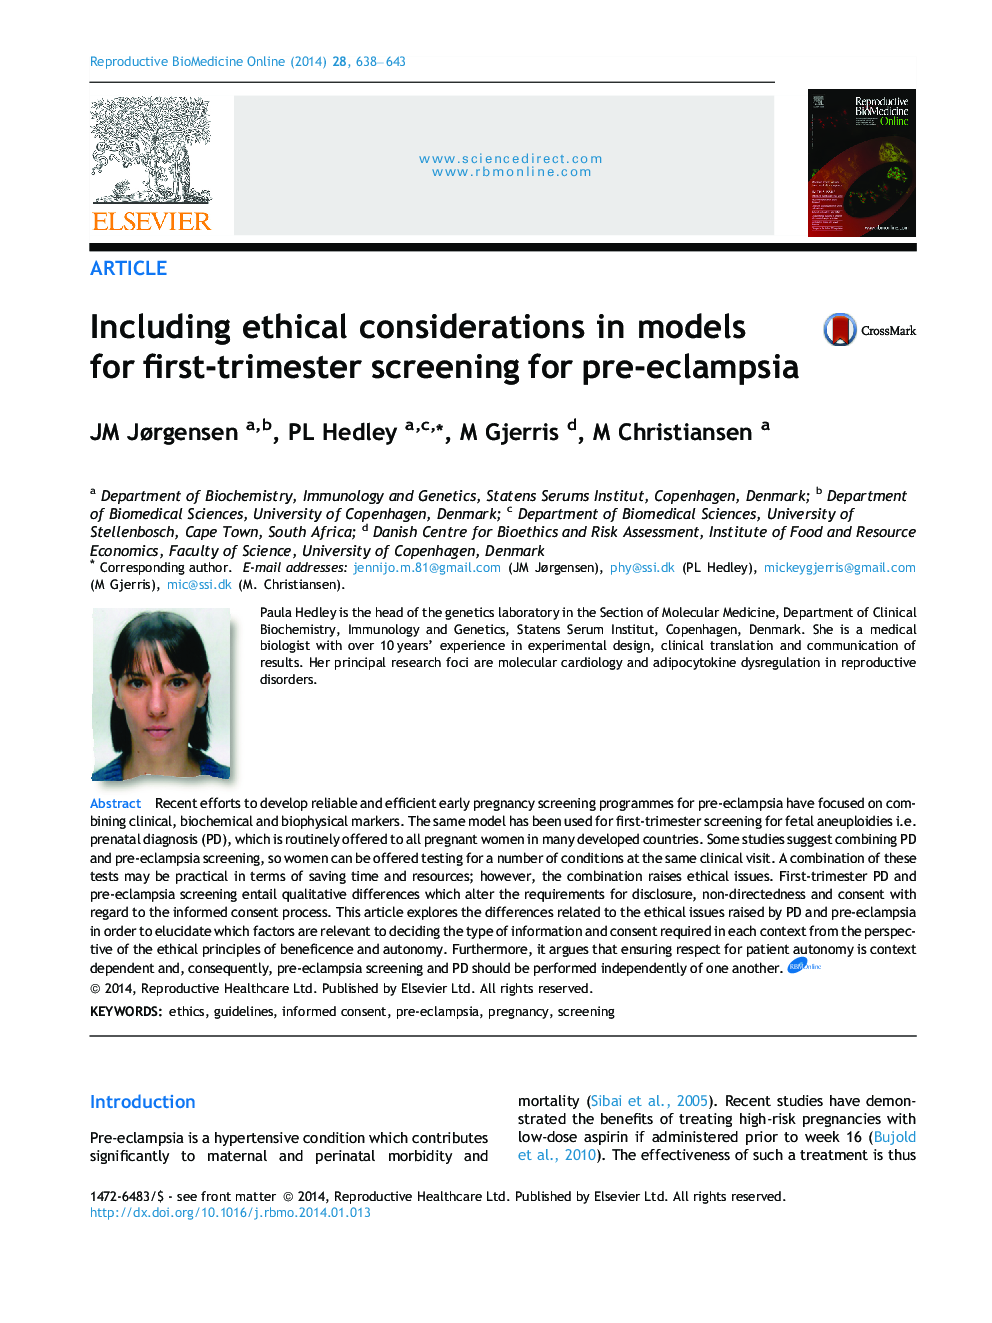 Including ethical considerations in models for first-trimester screening for pre-eclampsia